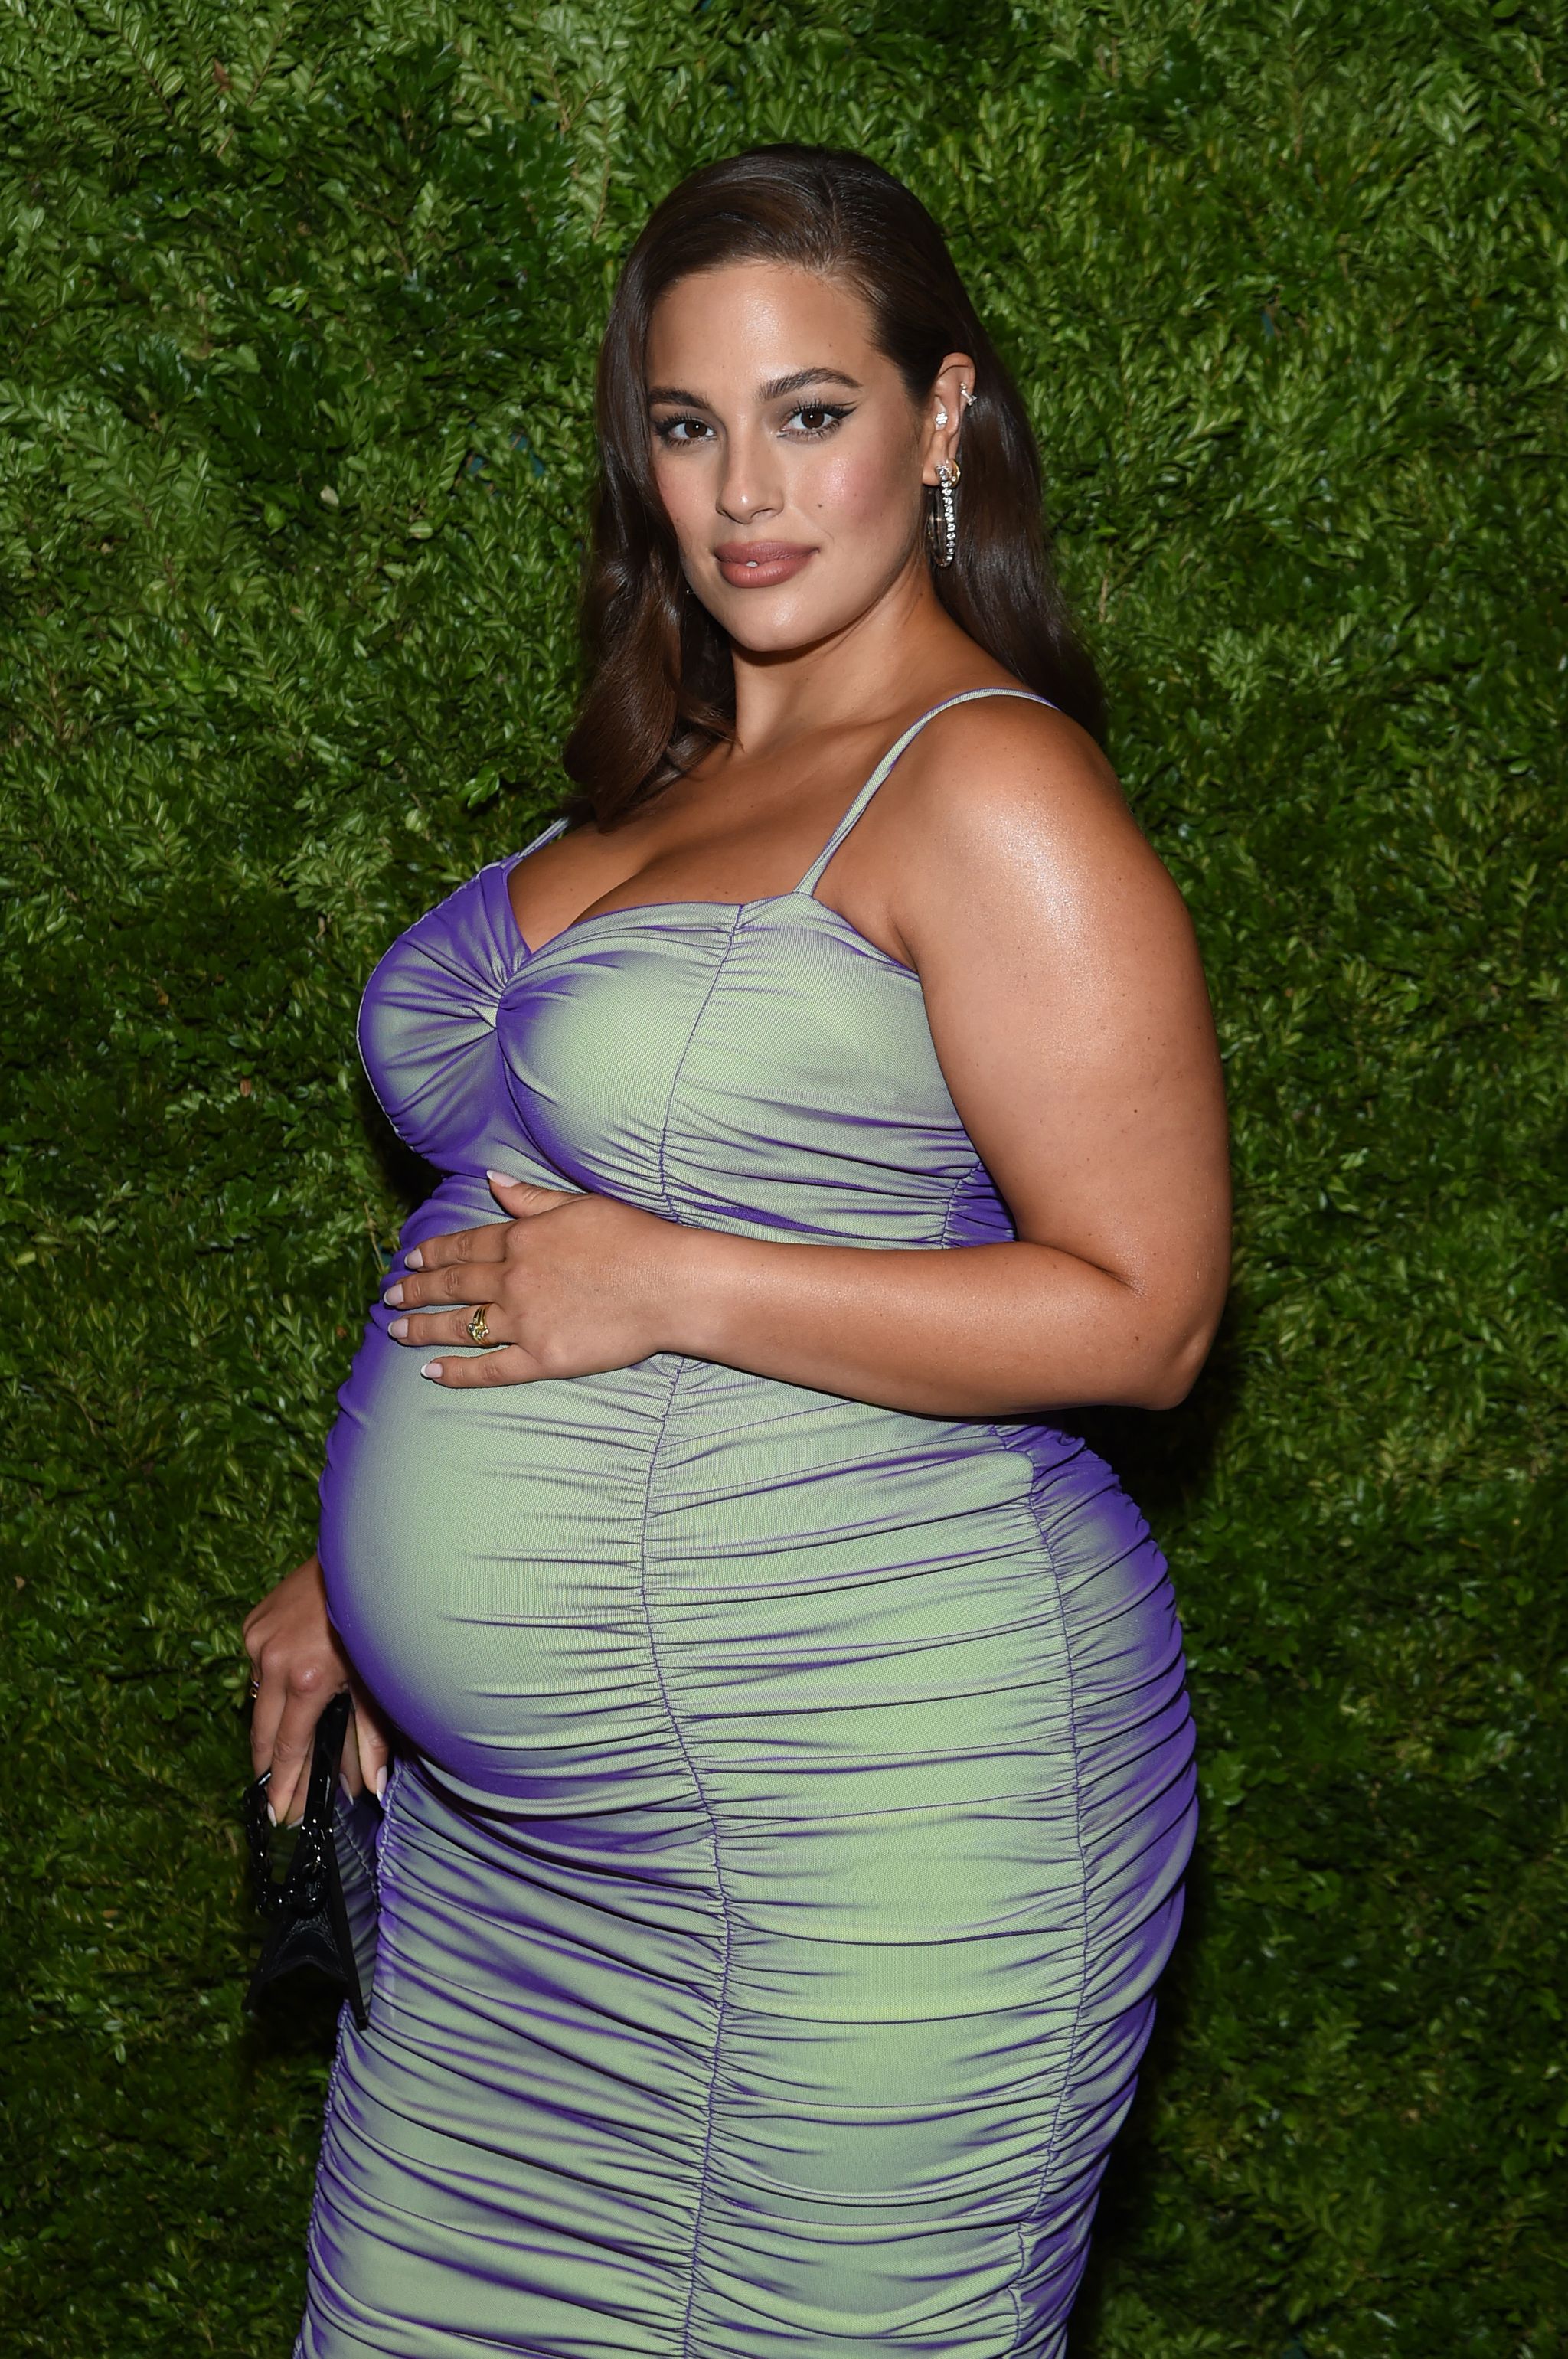 Pregnant Ashley Graham Shows Off Her Underwear as She Works Out